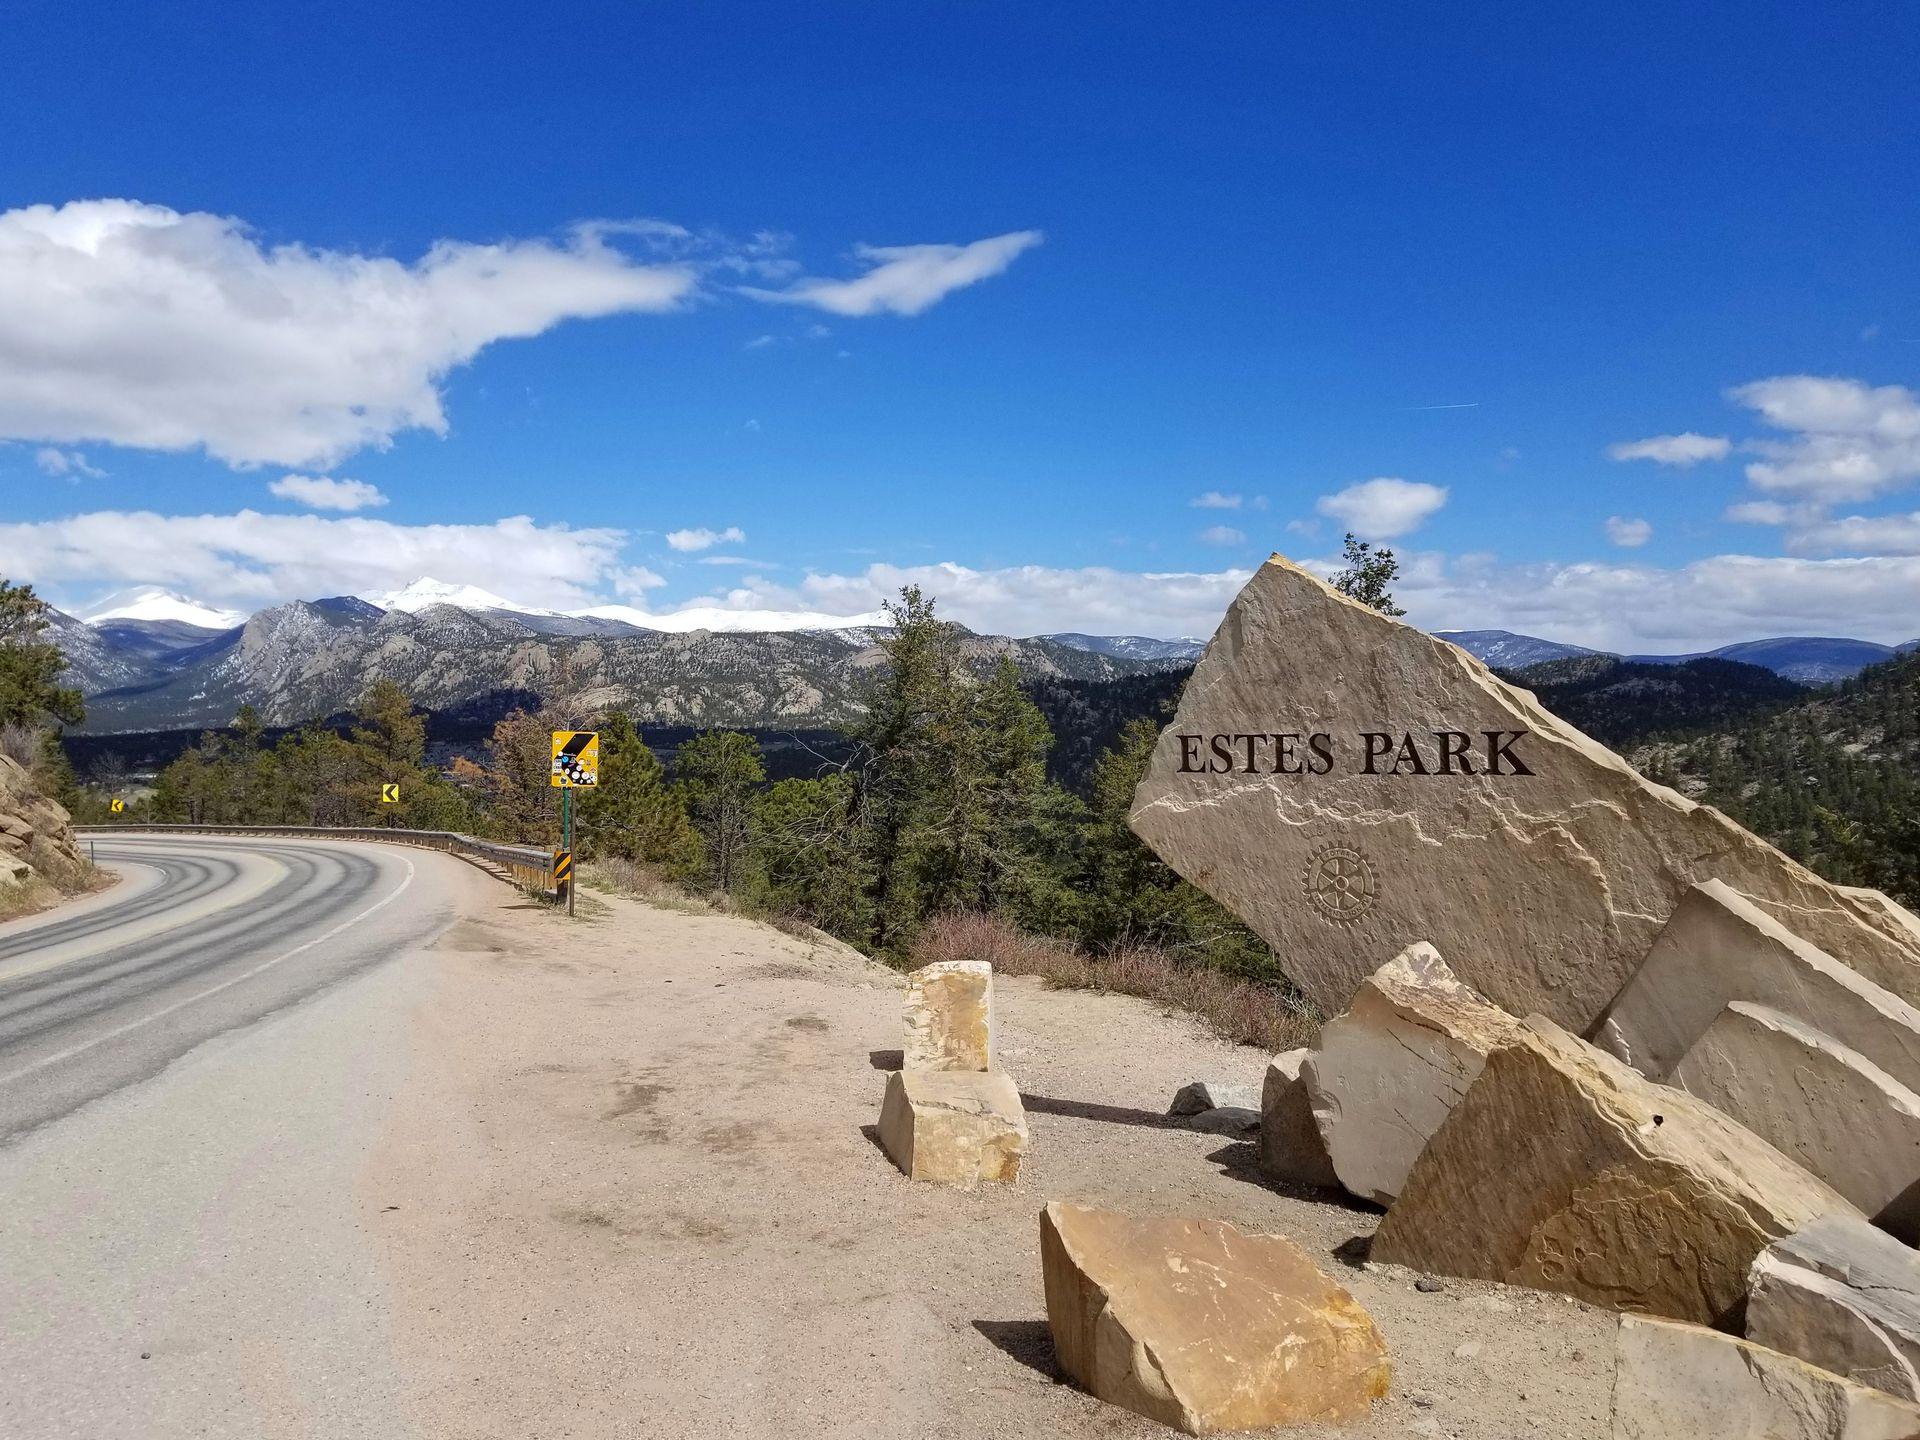 A sign made of huge stones that says "Estes Park." It is next to a windy road and there are mountains in the distance.